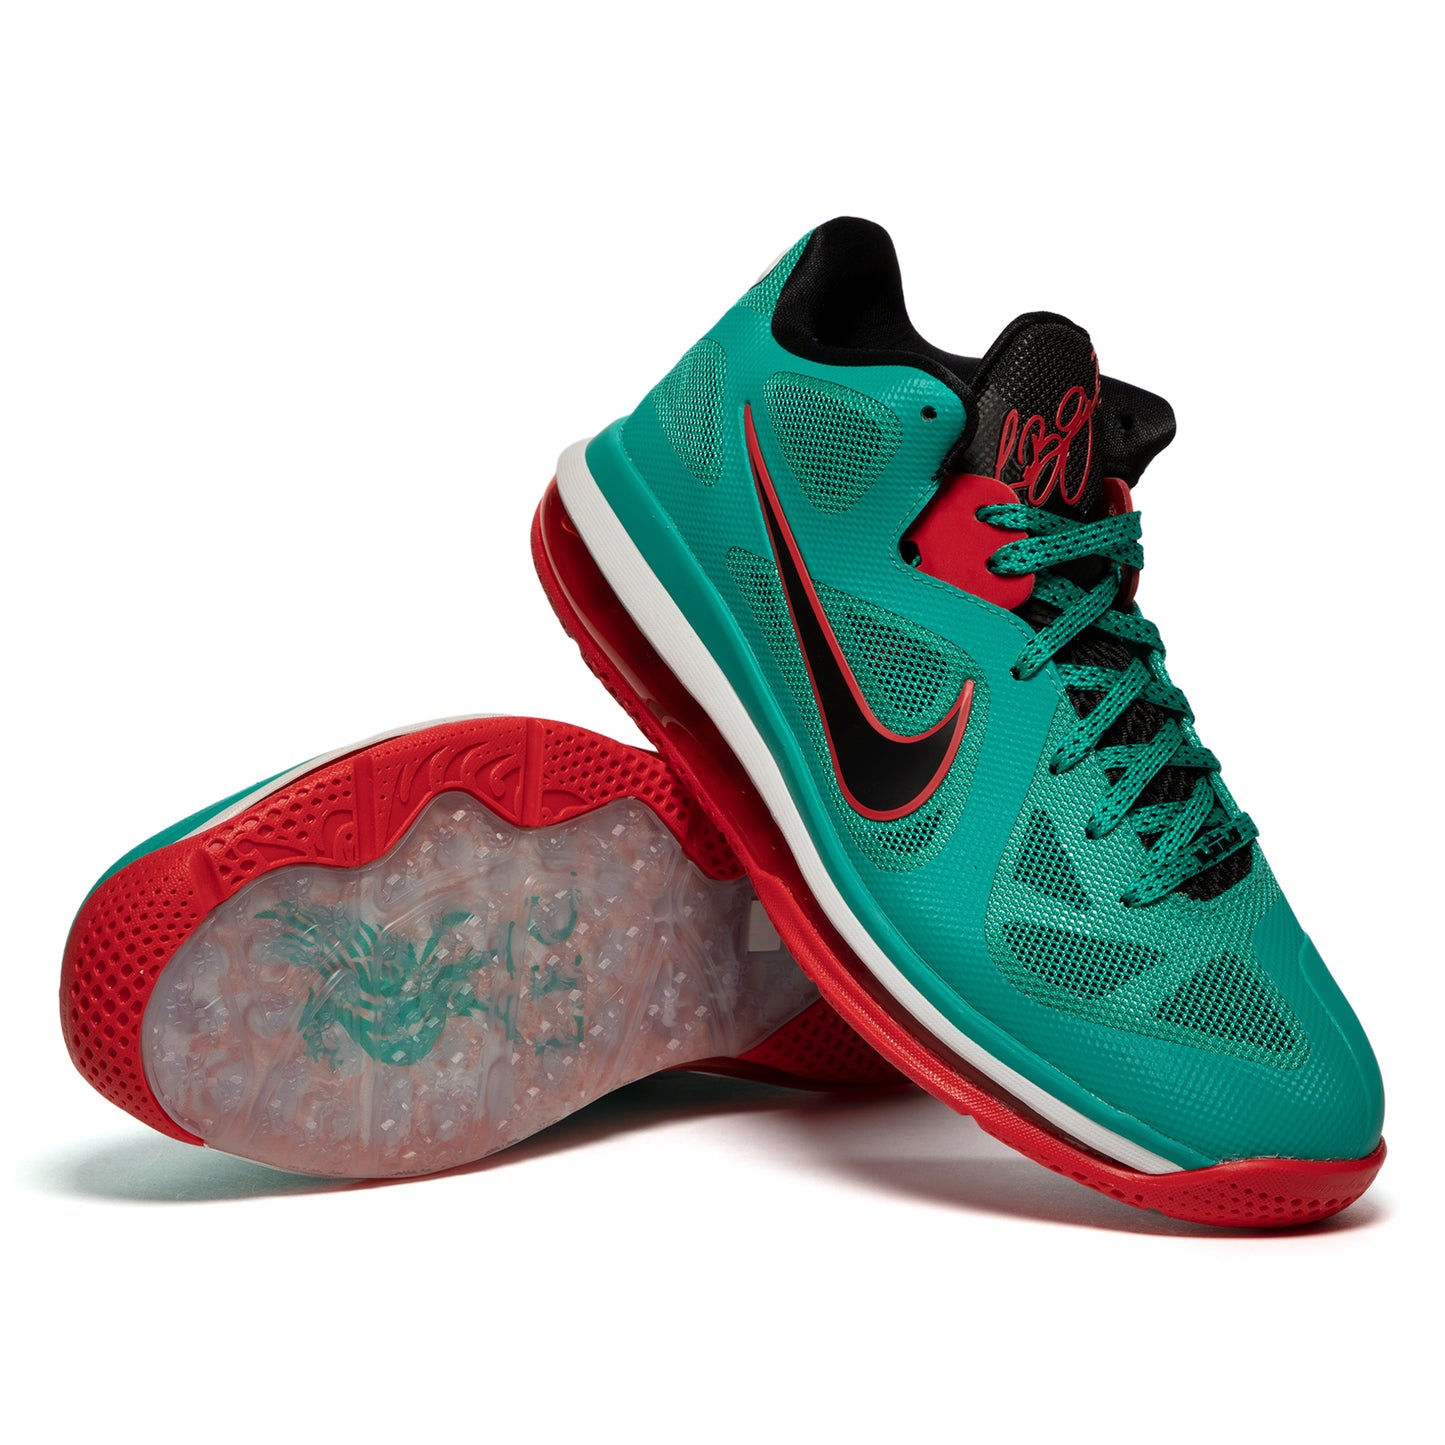 Nike Lebron IX Low (New Green/Black/Action Red/White)